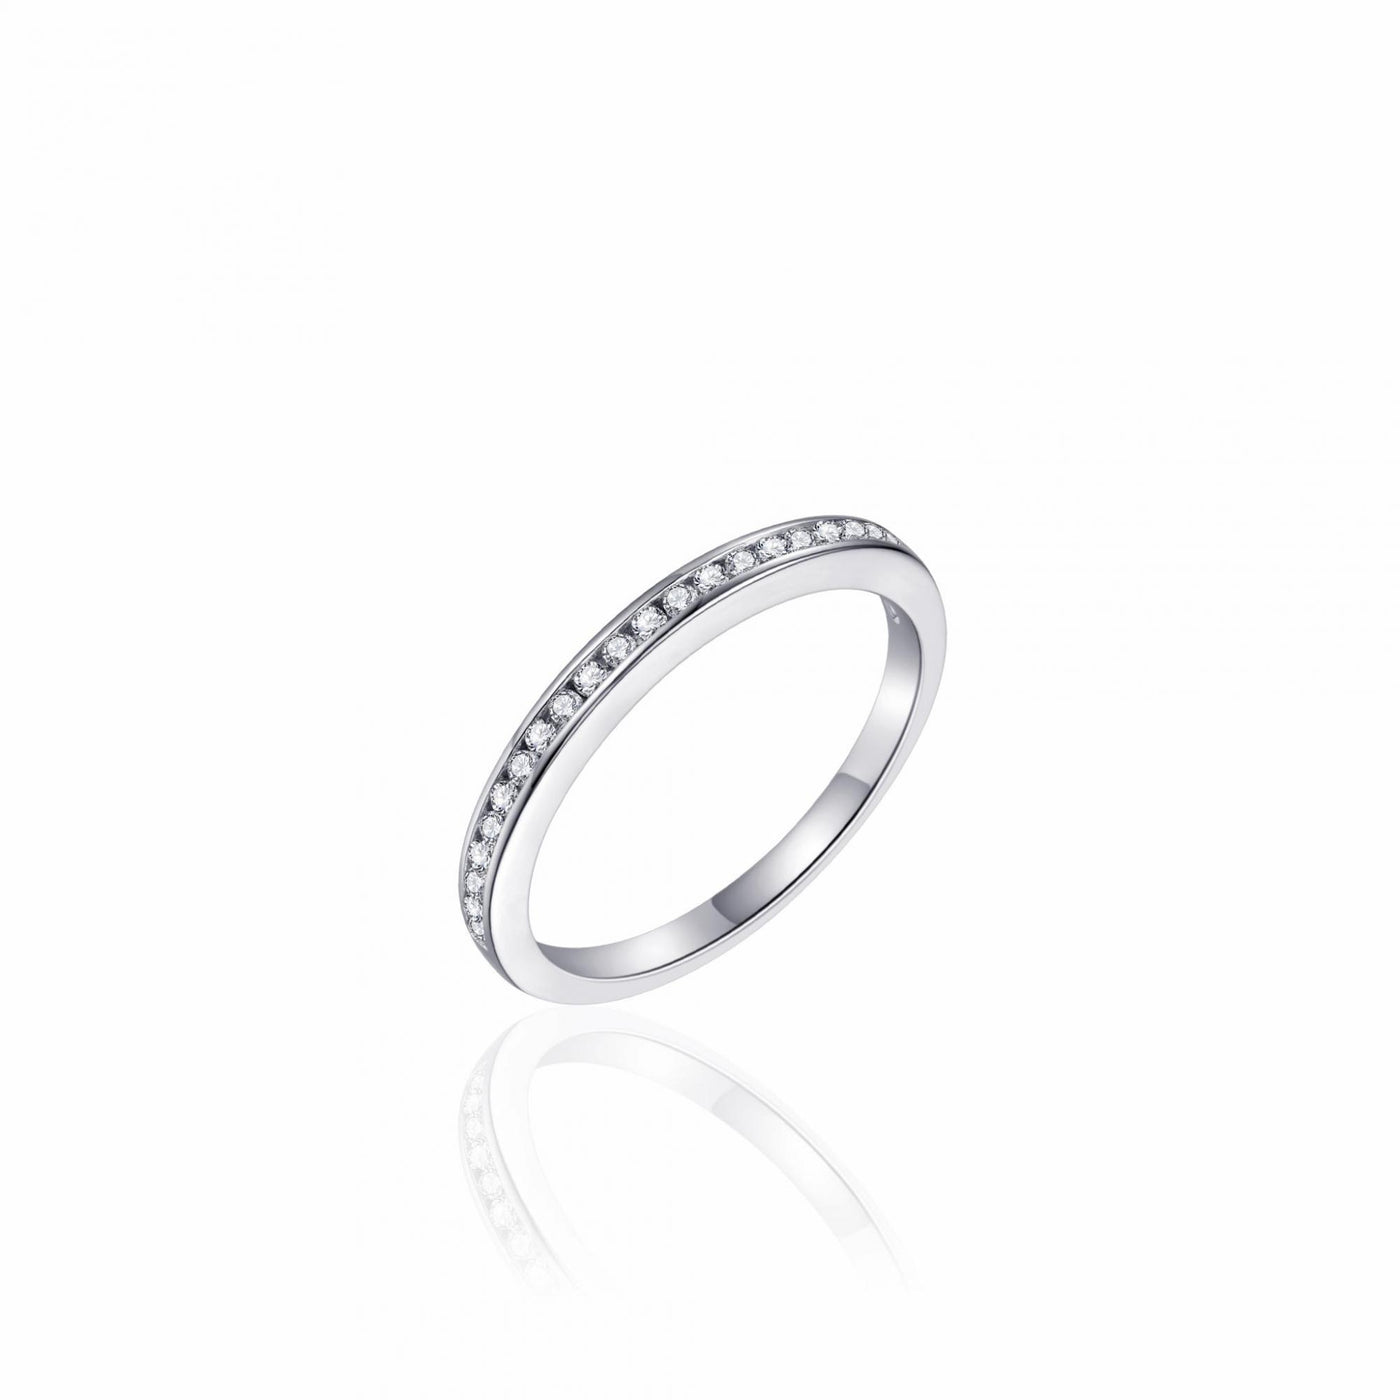 Gisser Sterling Silver Ring - Zirconia Stones Band